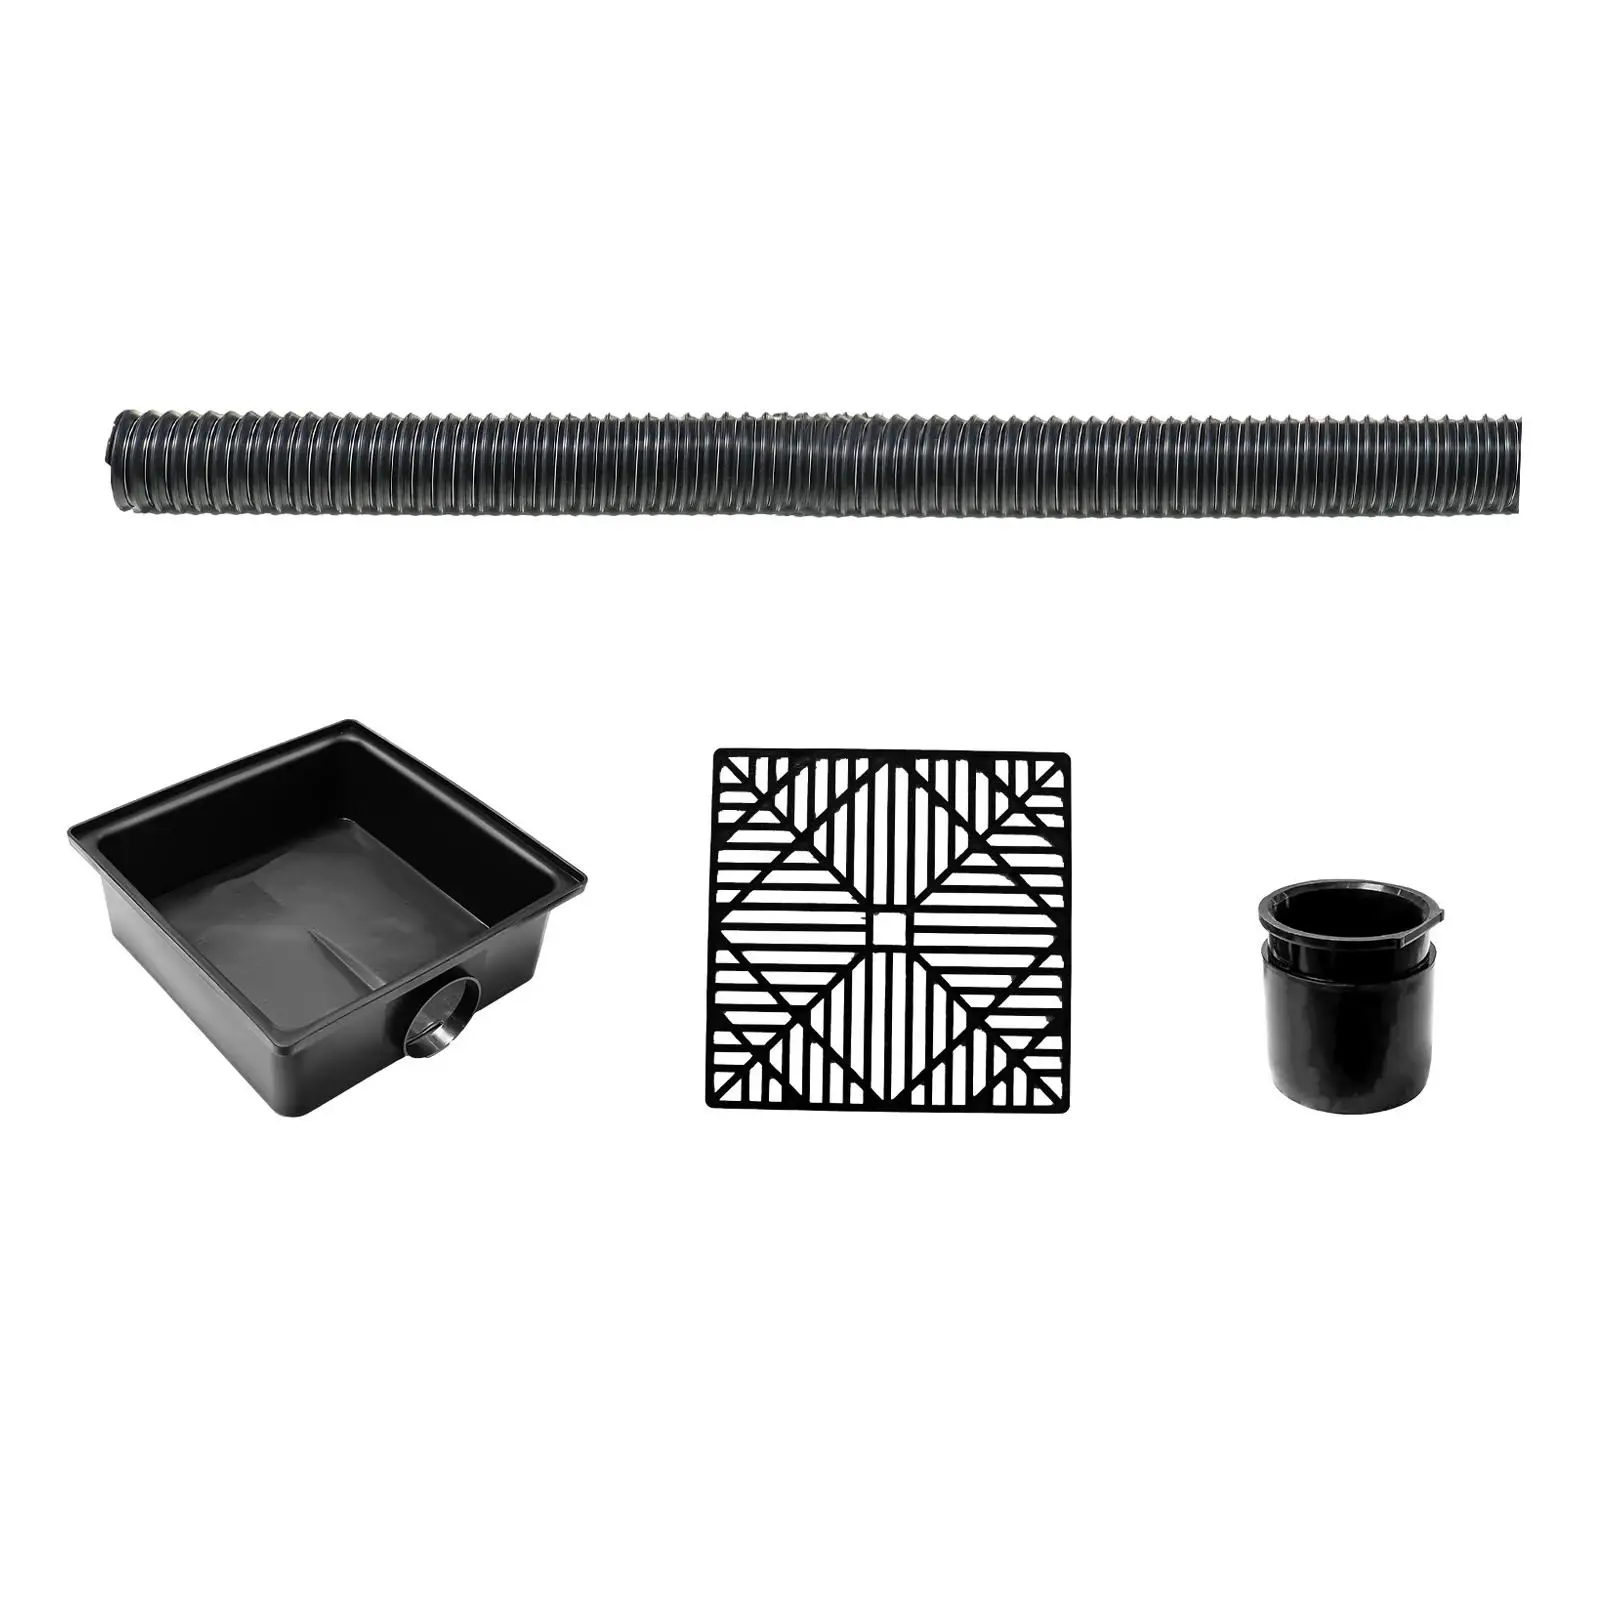 Catch Basin Downspout Extension Kit Rainwater Diverter Flexible Pipe Upgraded